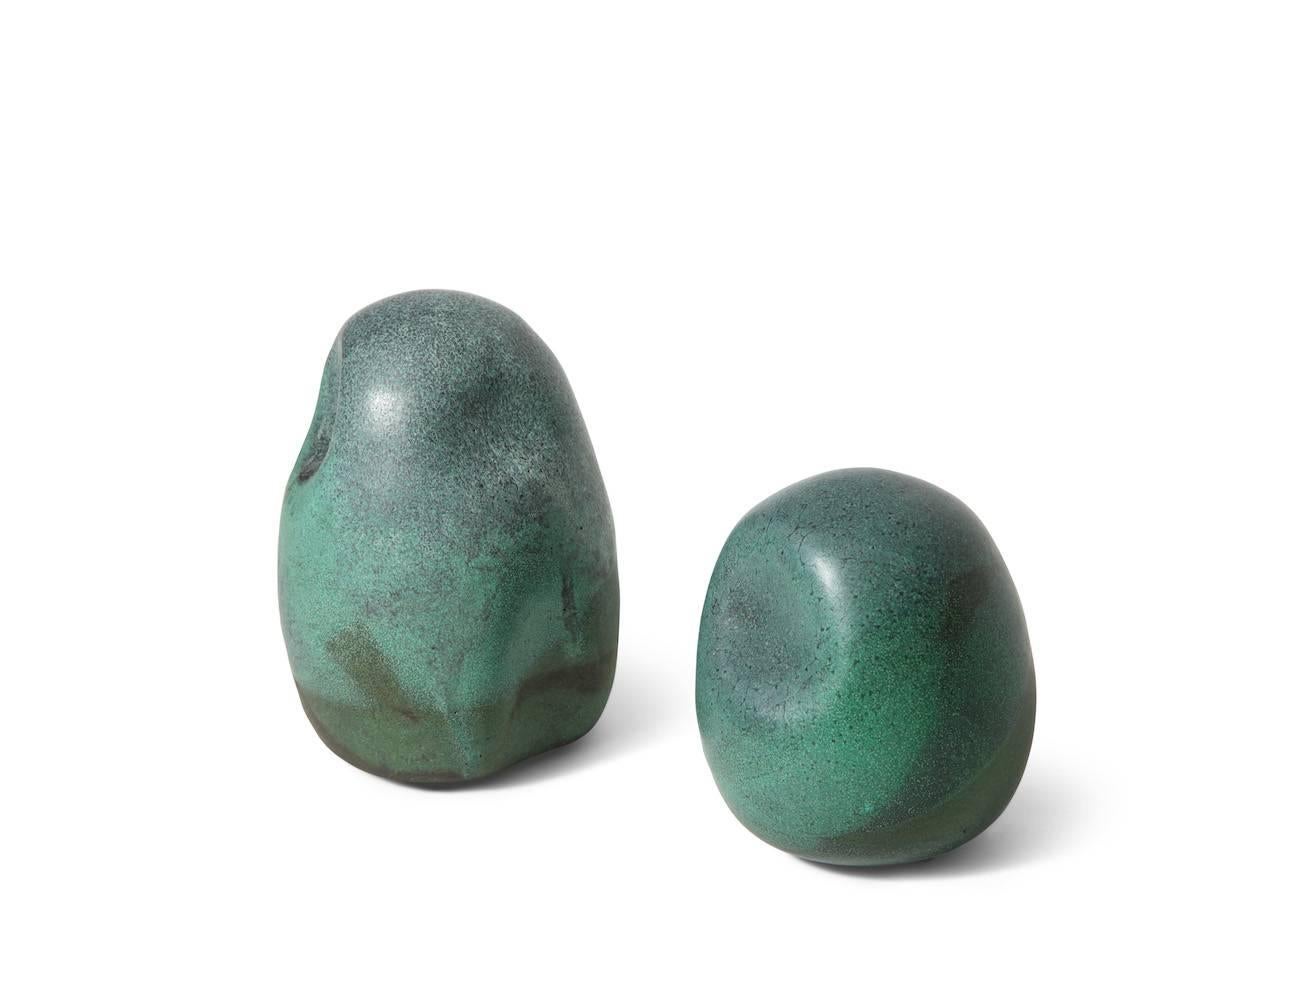 Ceramic rocks by David Haskell.
Abstract ceramic forms resembling rocks. Wheel-thrown with great green glaze. Each one signed on underside.
Measures: Larger height 7.75